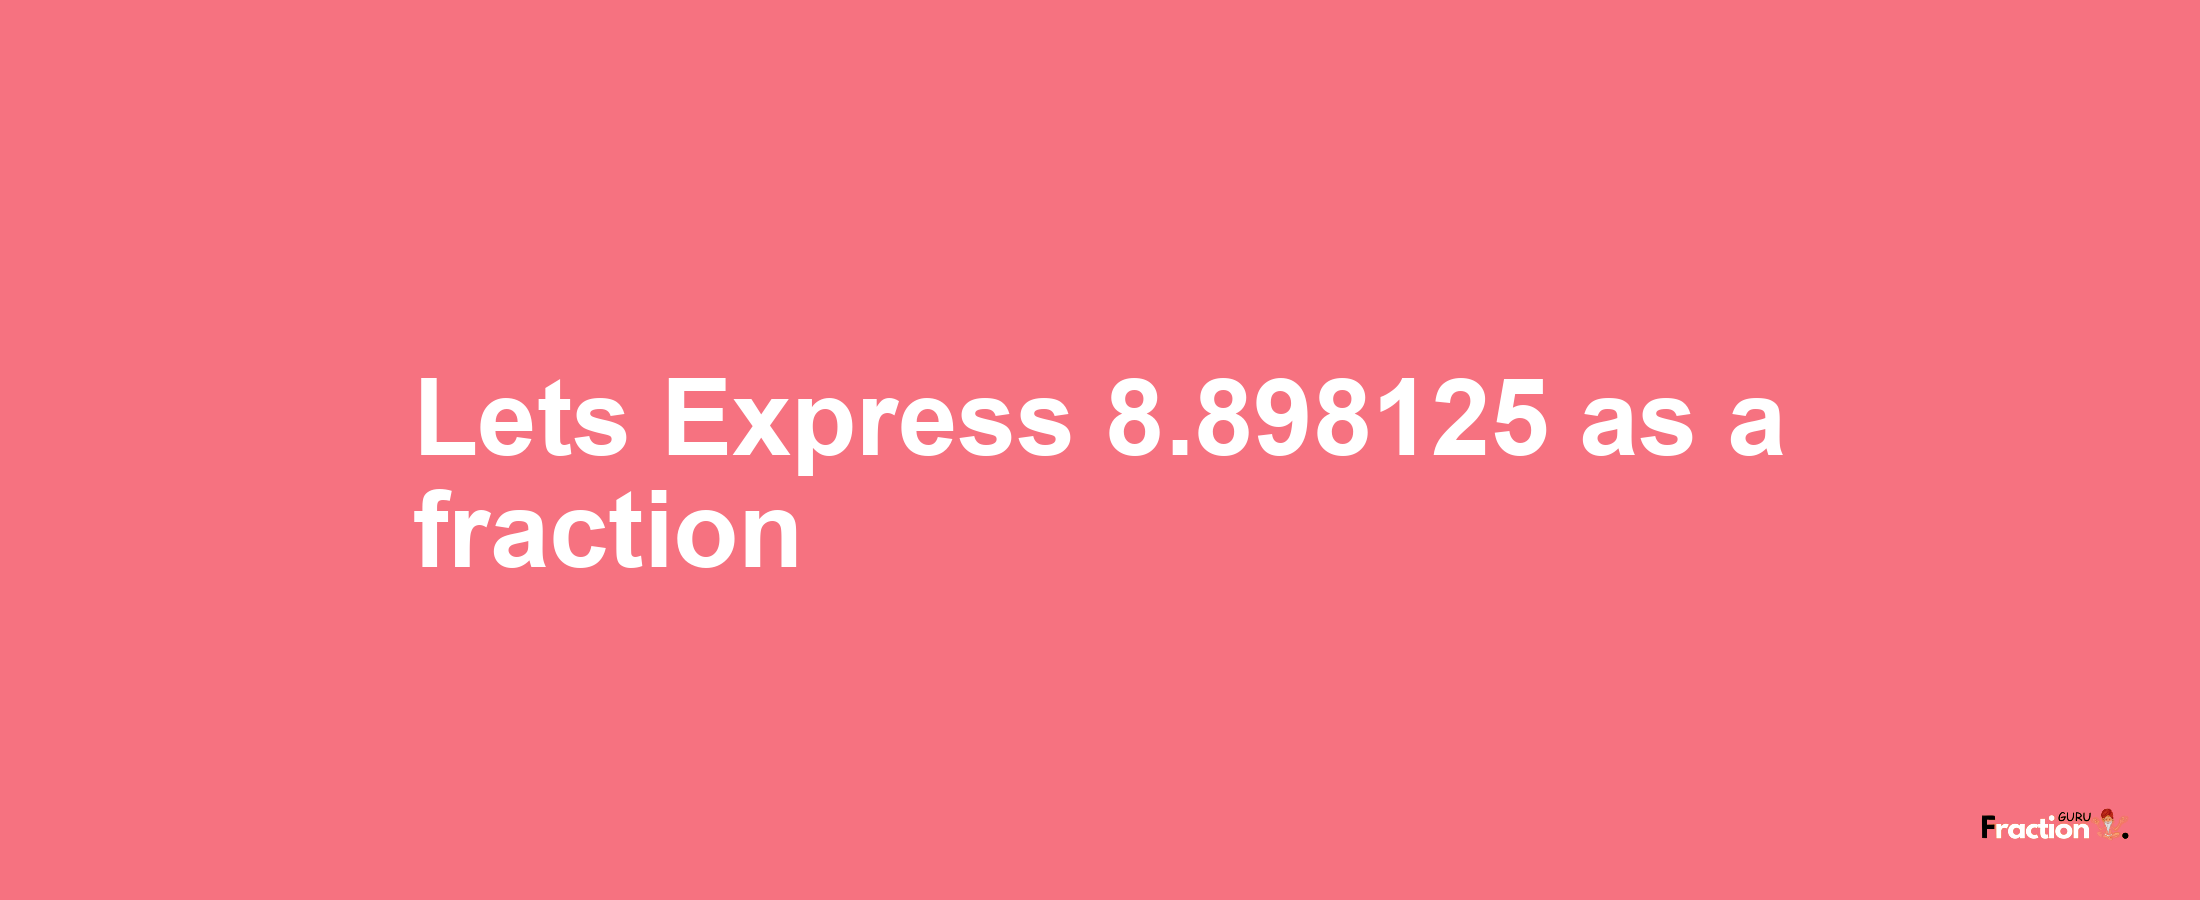 Lets Express 8.898125 as afraction